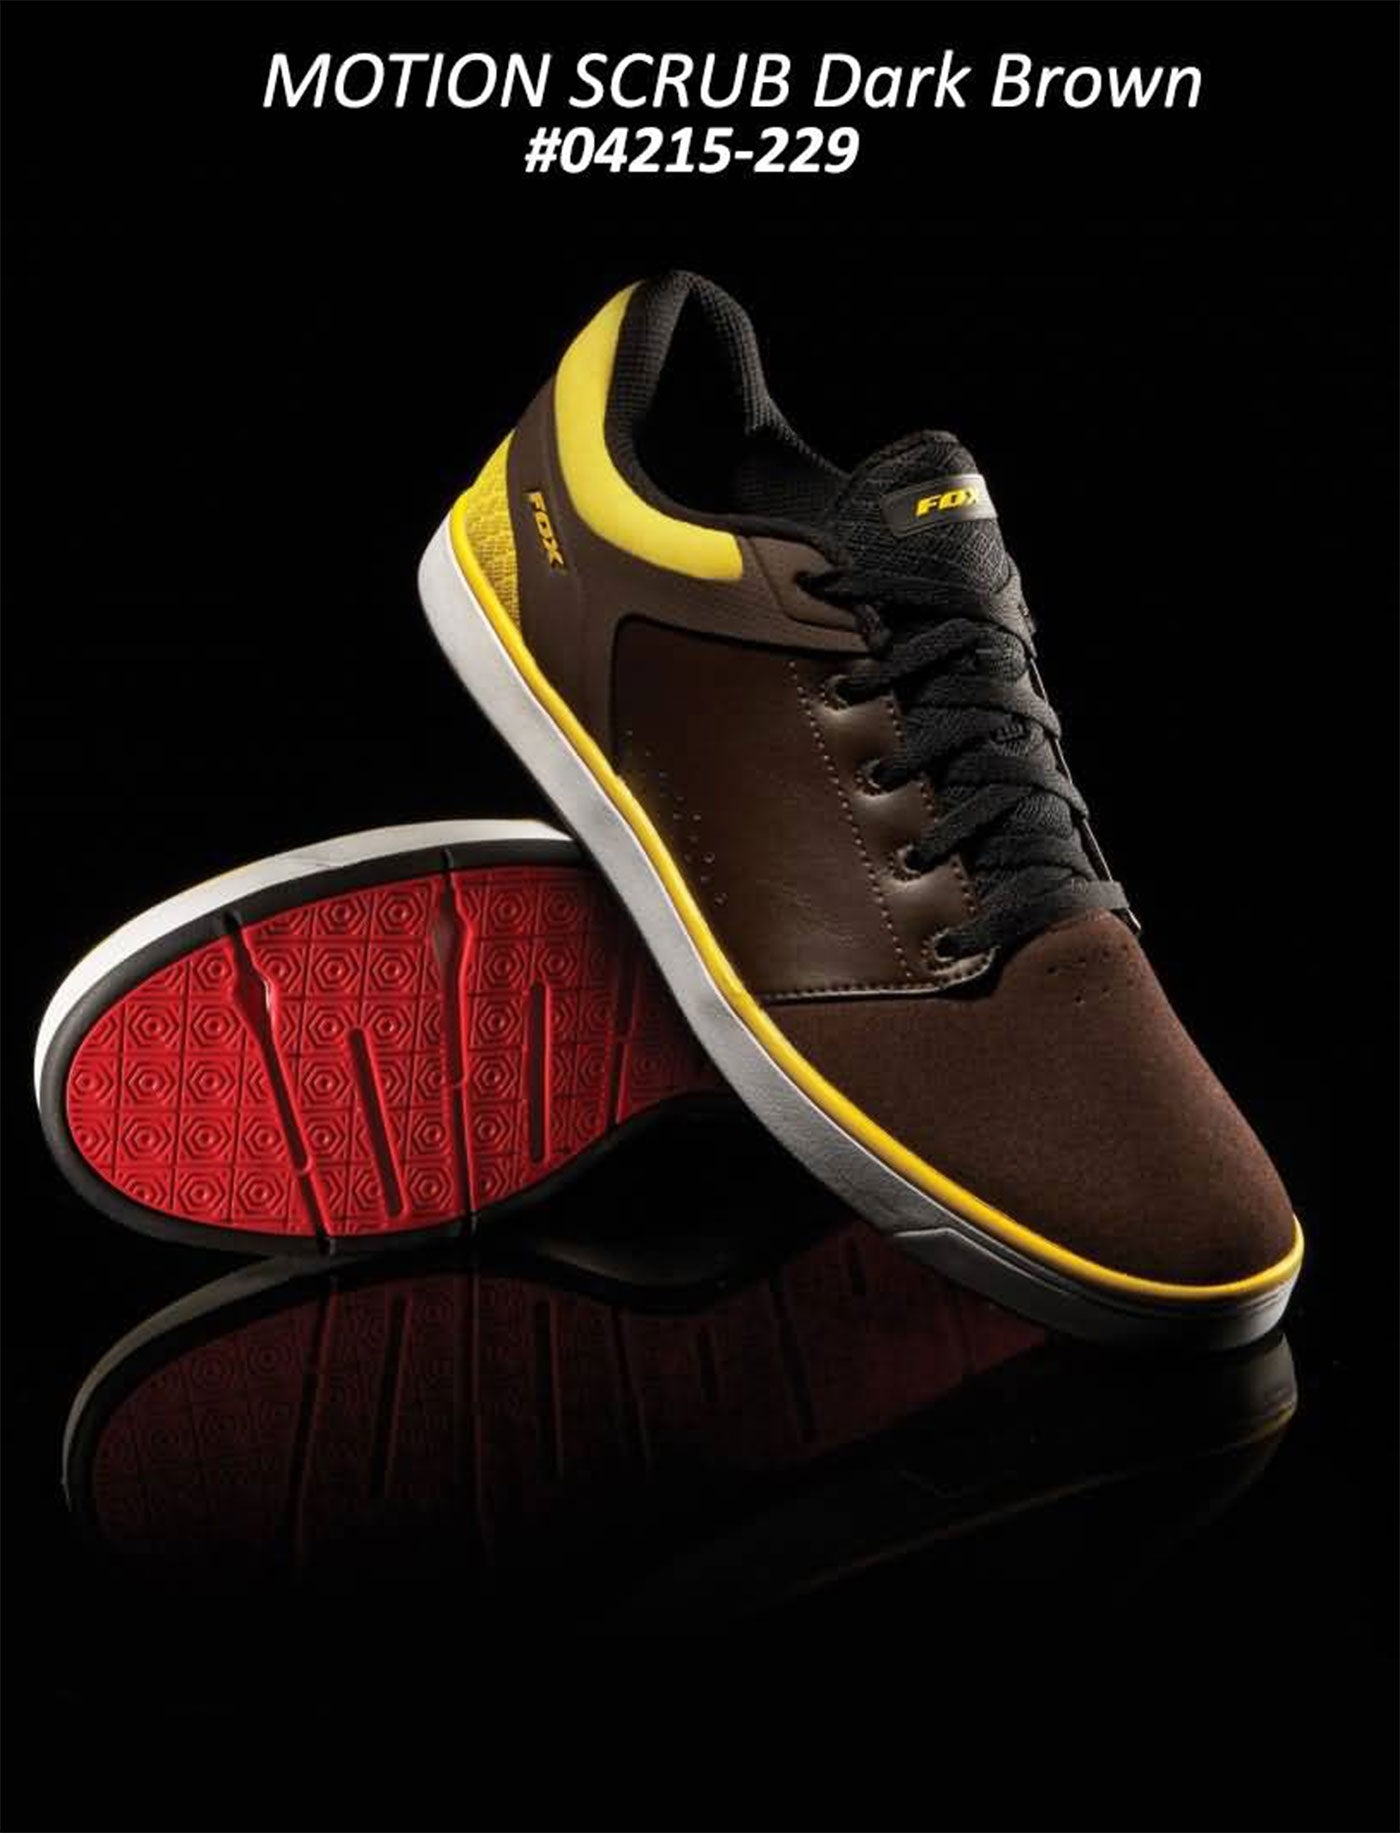 Fox Racing Fall 2013 Mens Shoes Lifestyle Athletic Footwear Collection